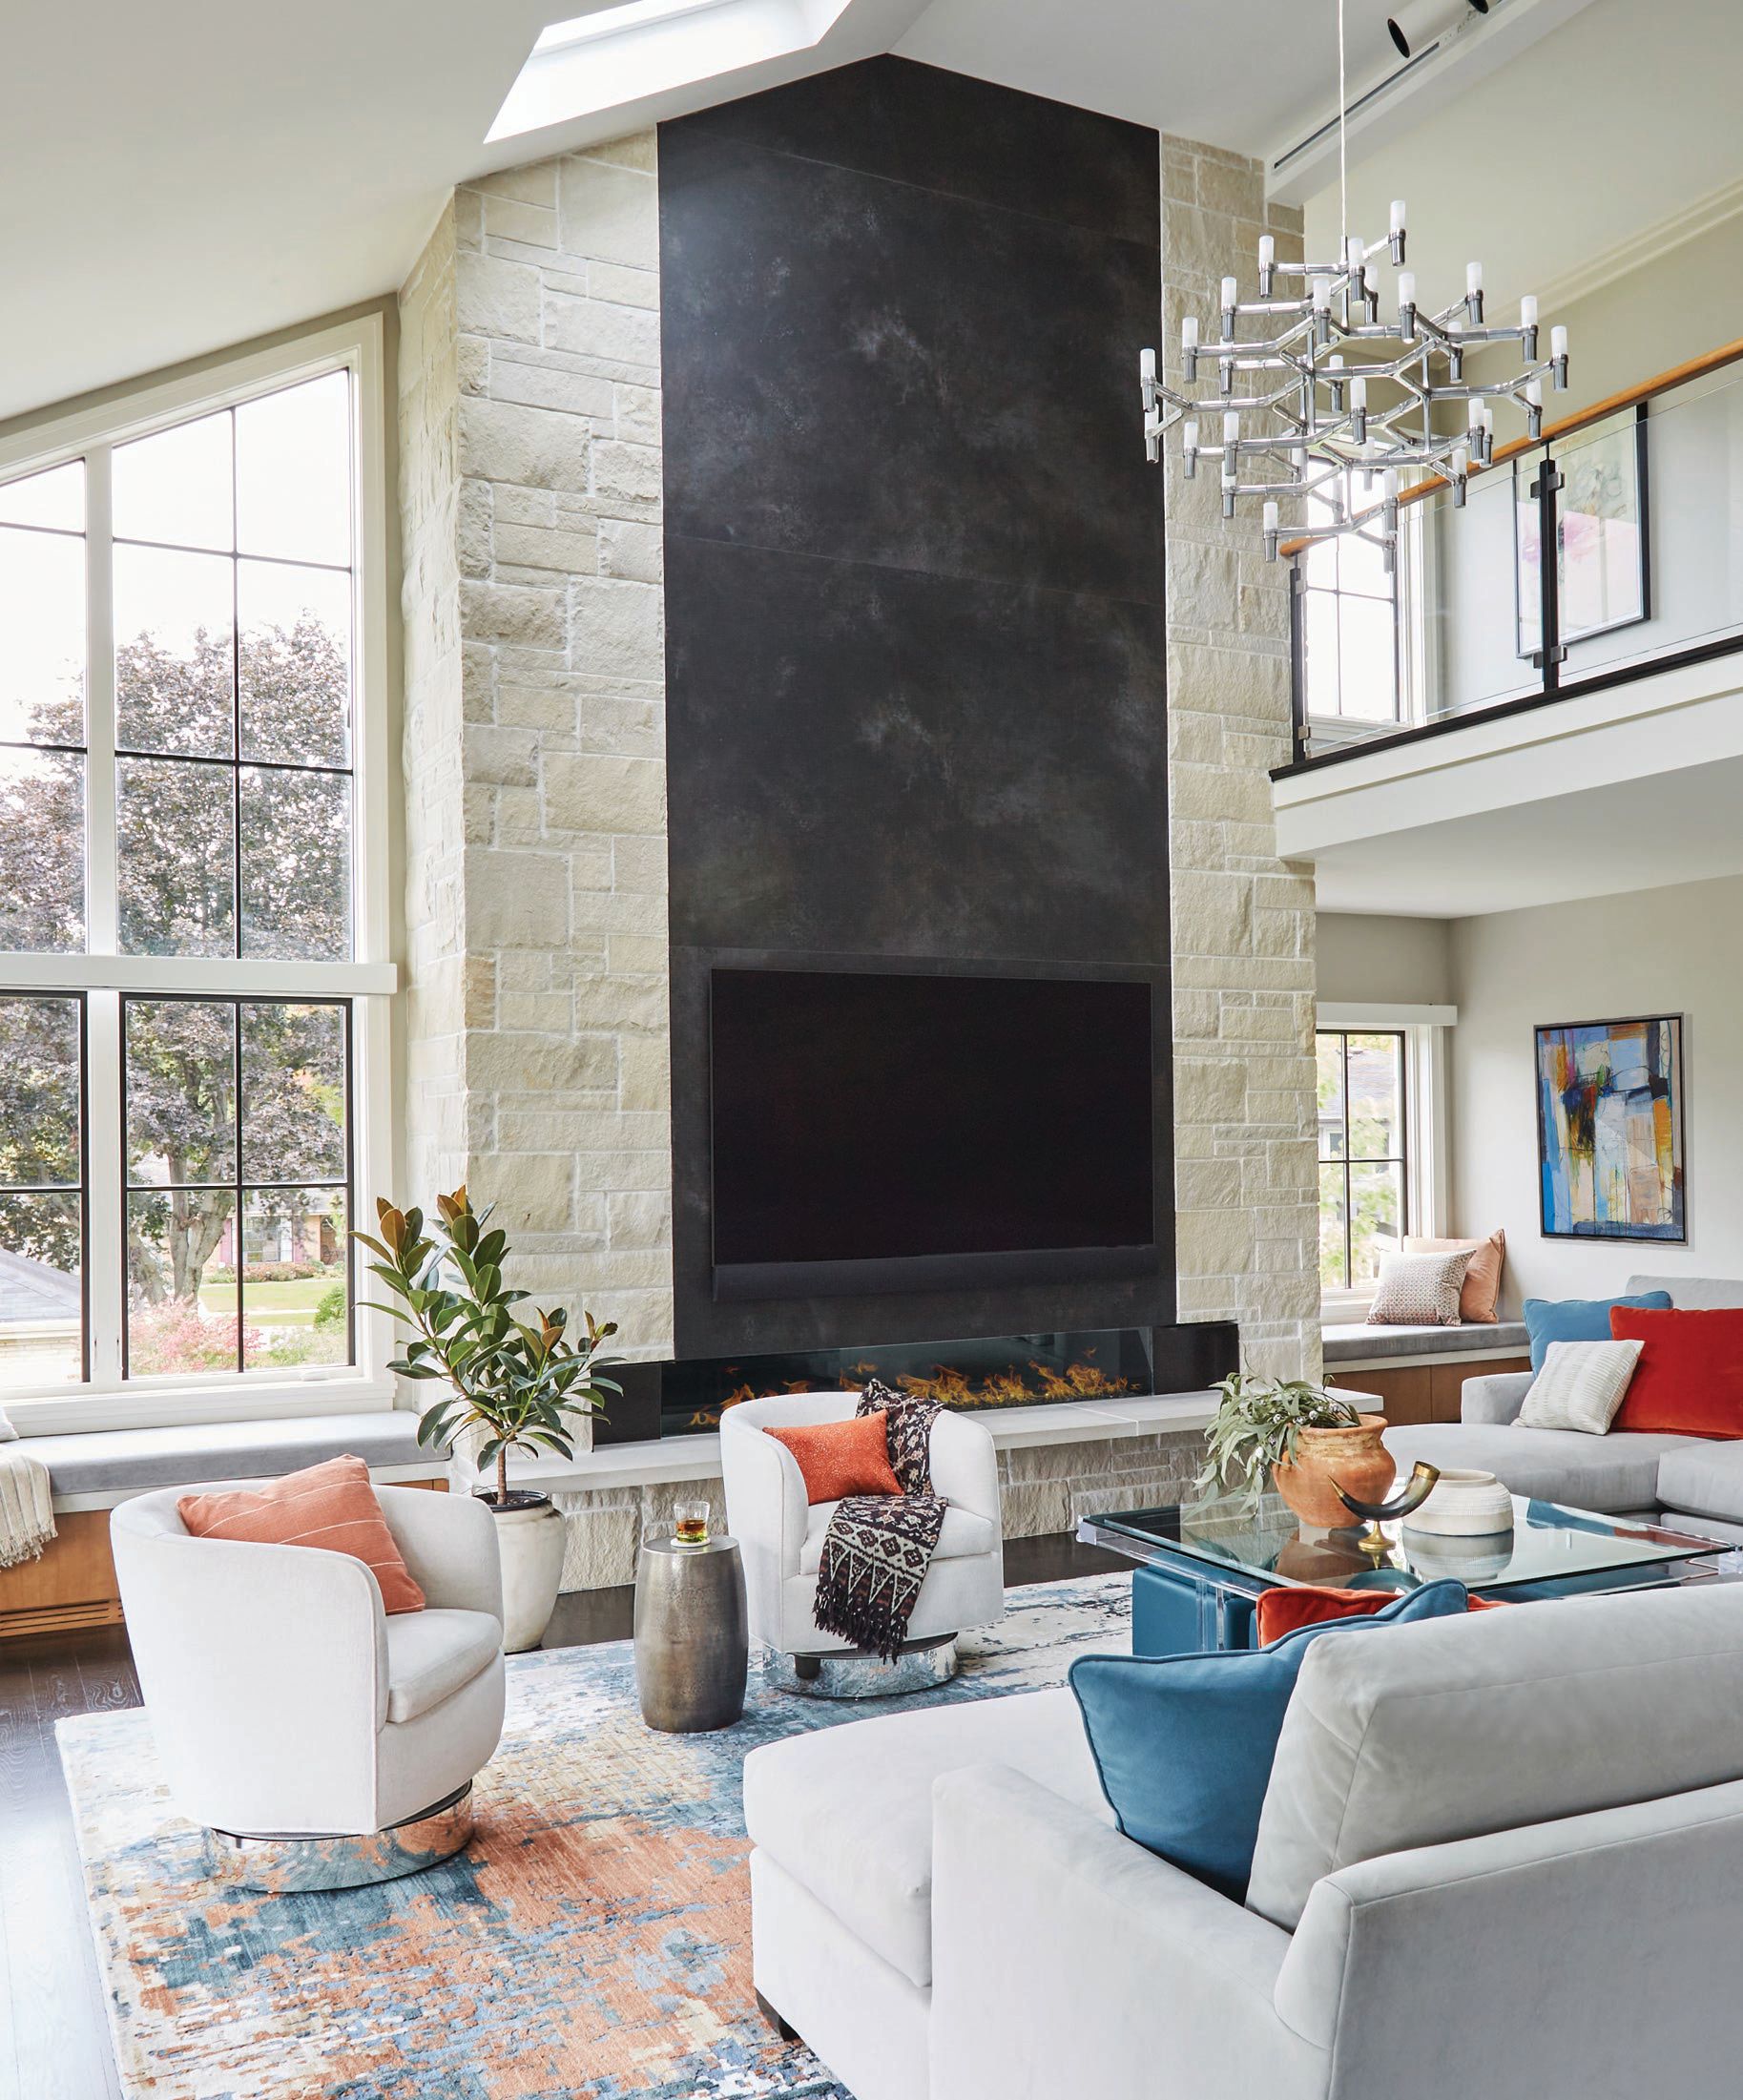 The soaring family room is anchored by a Crown Major chandelier in polished aluminum from Lightology, sleek swivel chairs by Thayer Coggin, a sofa by Century Furniture and a coffee table by Kravet. Photographed by MICHAEL ALAN KASKEL